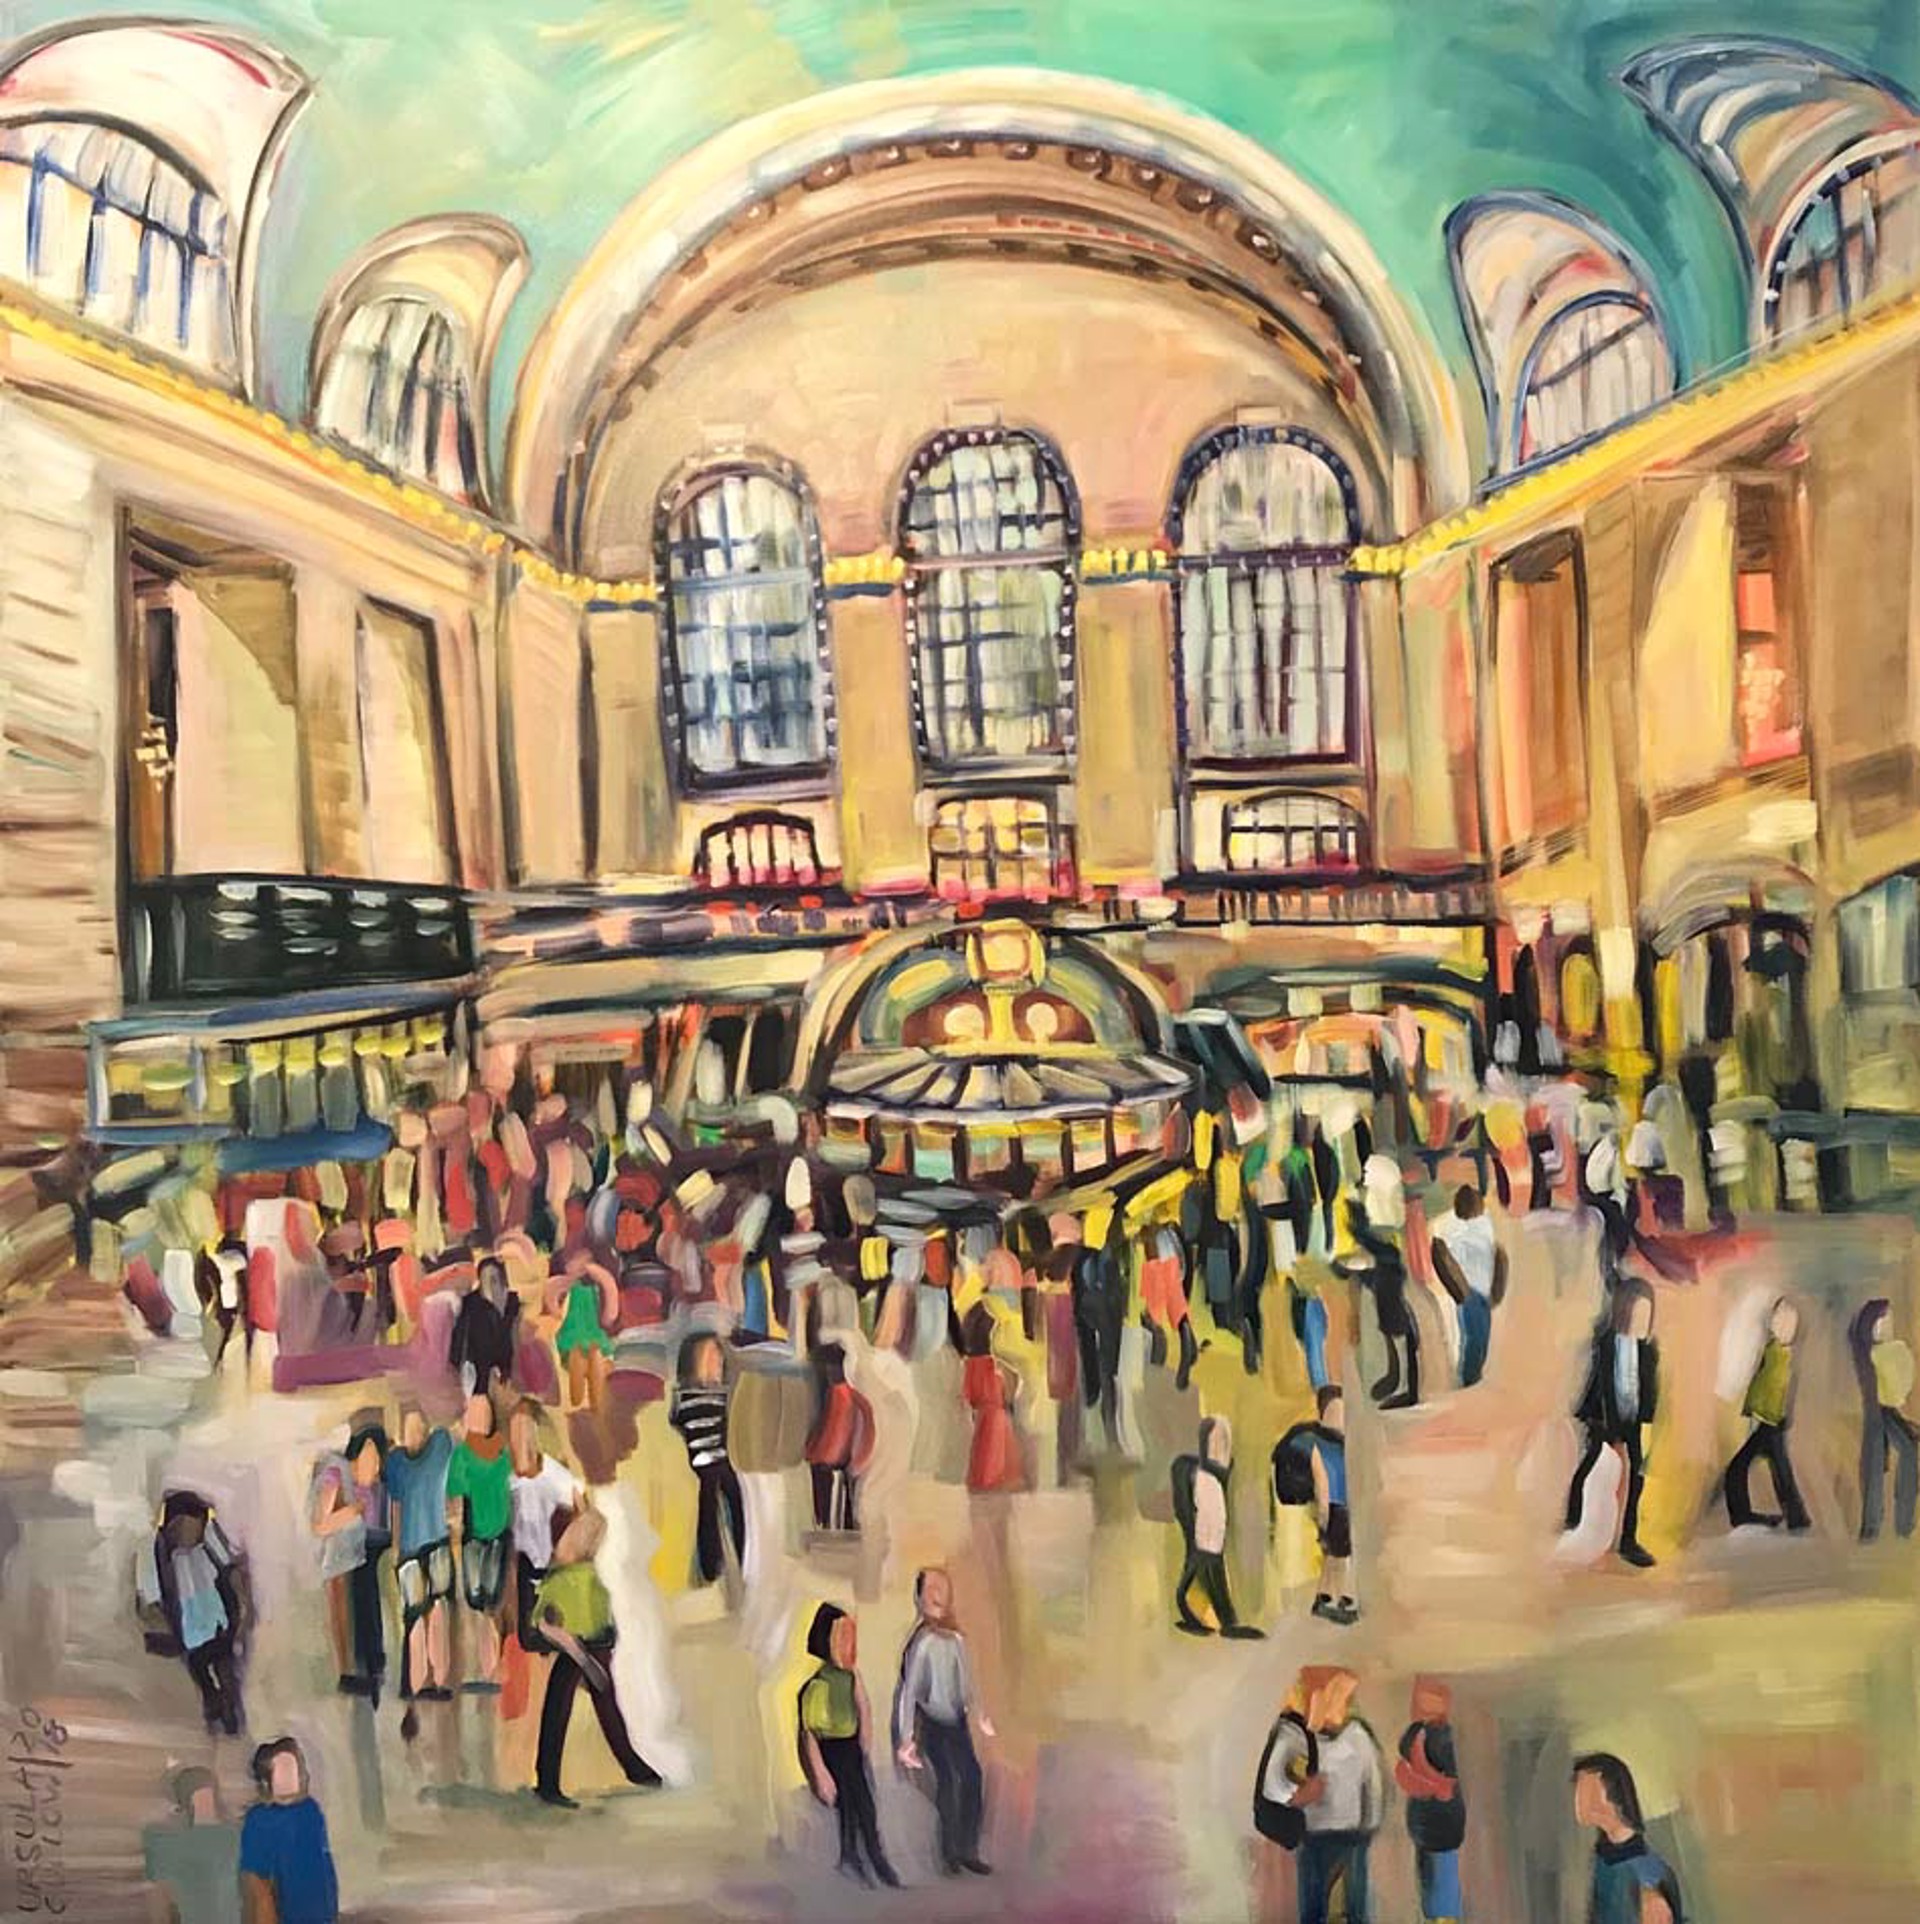 Grand Central Crowd by Ursula Gullow